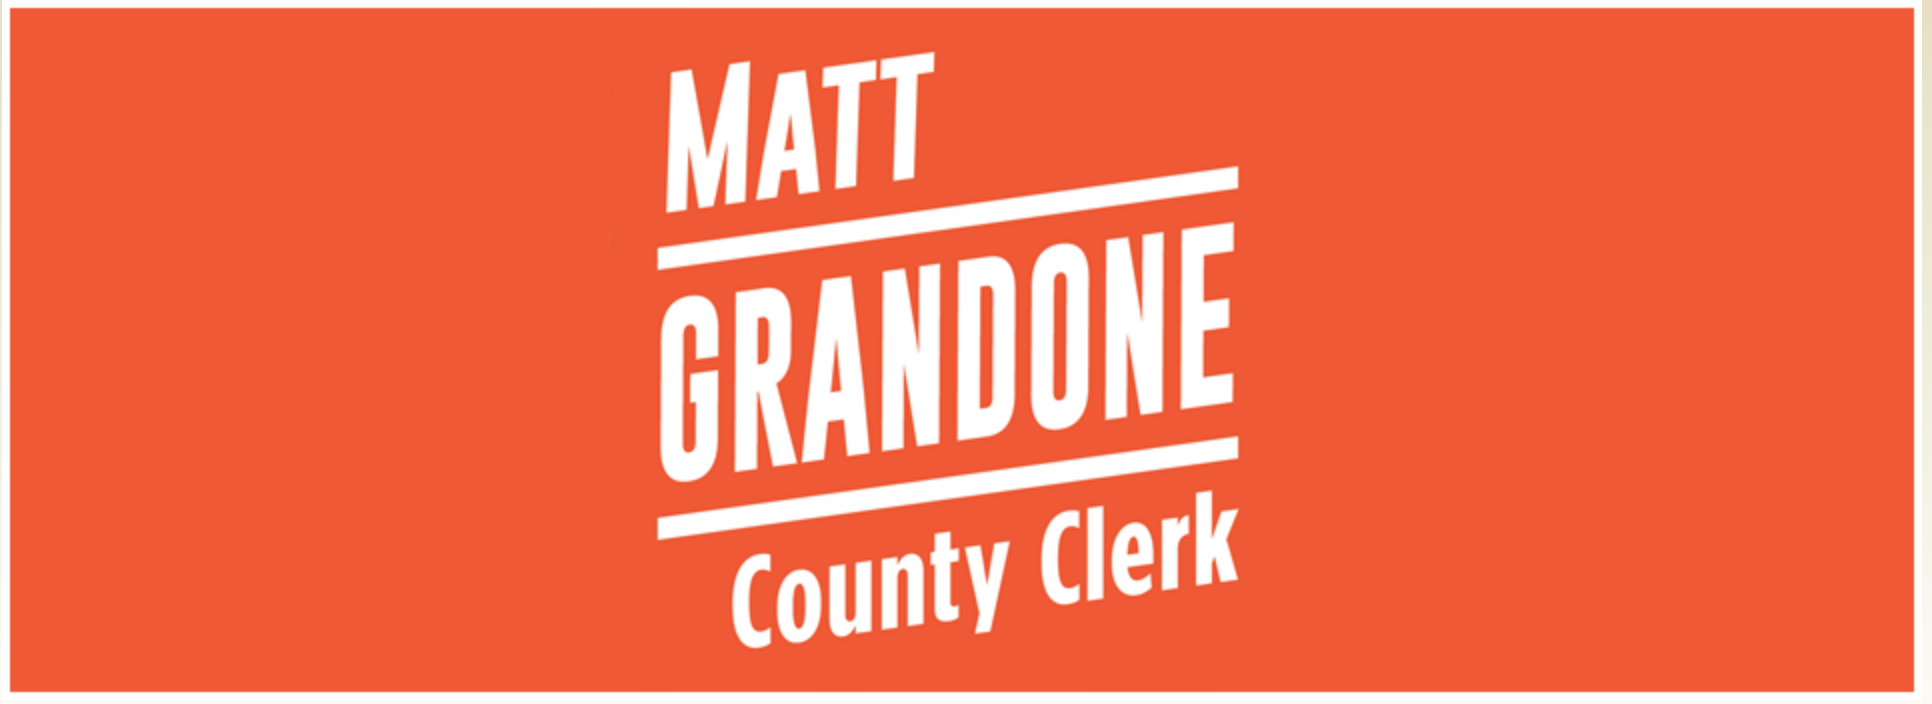 Interview with Matt Grandone, candidate for county clerk